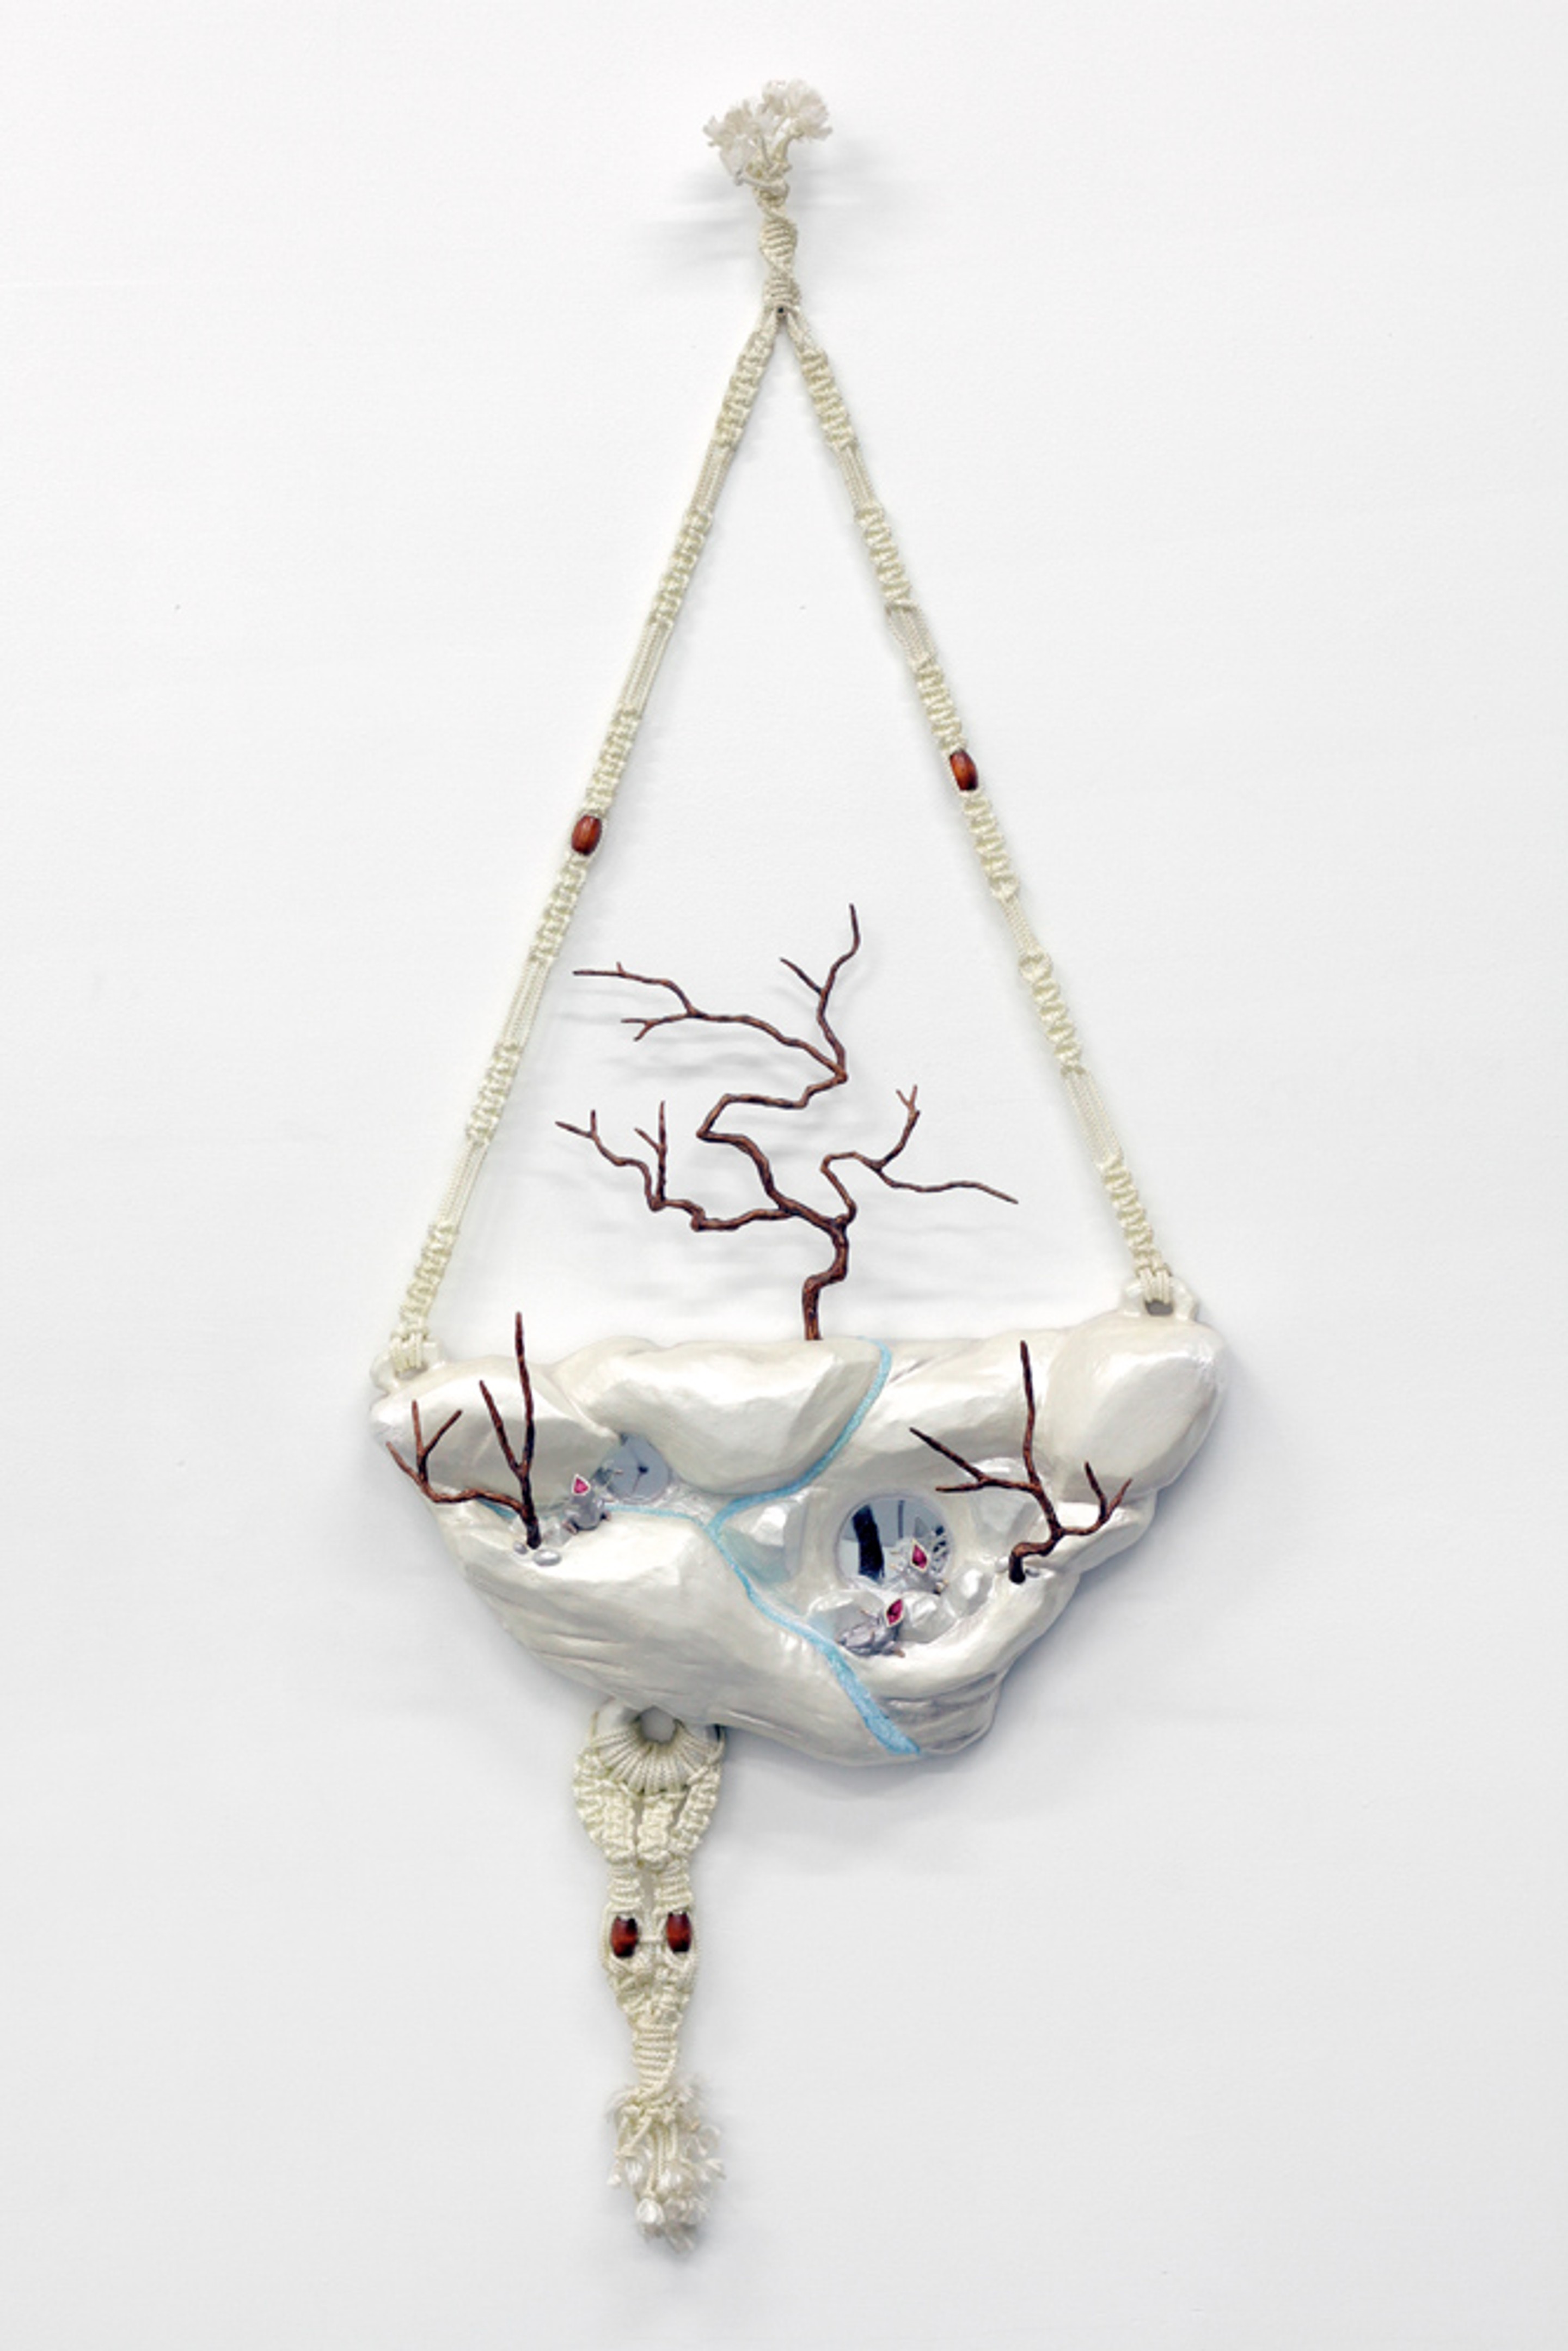 Mindy Rose Schwartz, After Falling Out of their Nest, Baby Birds Land on the Face of a Cliff. Weary and Confused, Their Lives Hang in the Balance. (2005) Wood, foam, plaster, wire, rope